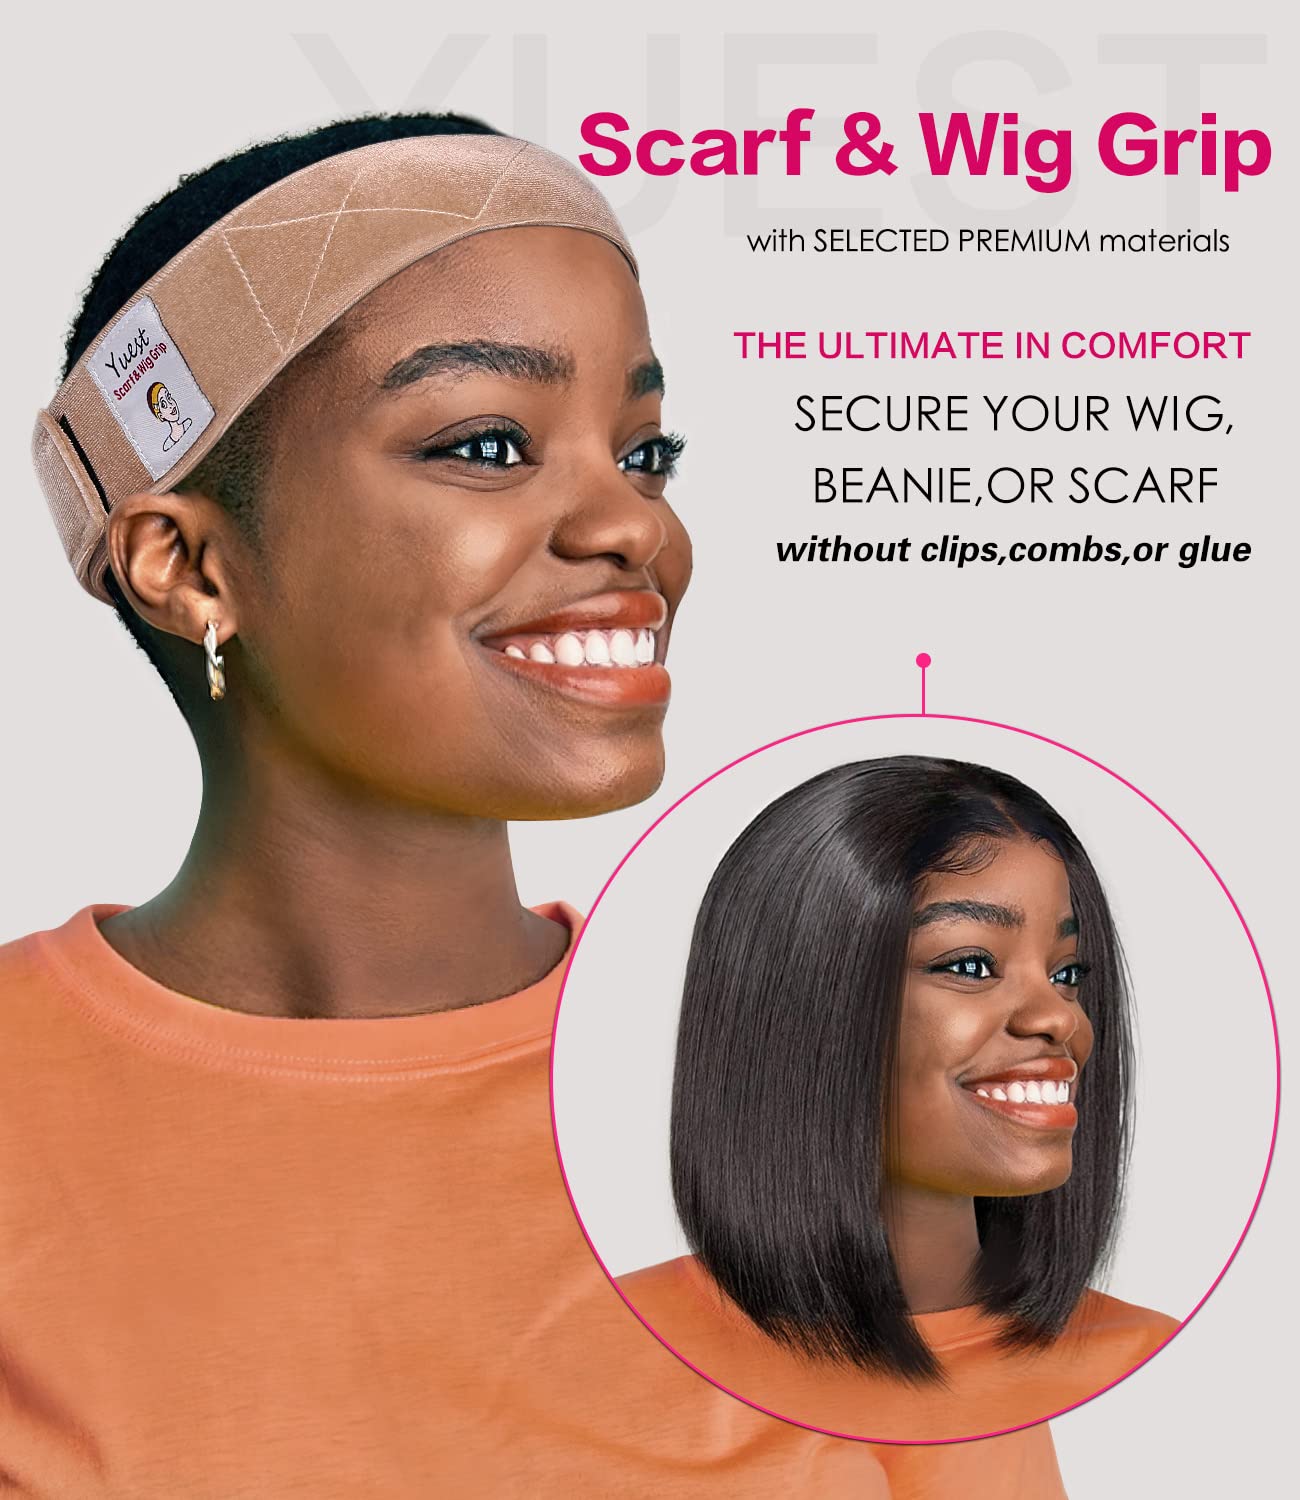 Yuest 2 Pack Wig Grip Band for Keeping Wigs in Place Secured Velvet Wig Gripper Adjustable Wig Grips Headband Stay Put No Slip Accessories for Women Edge Saver